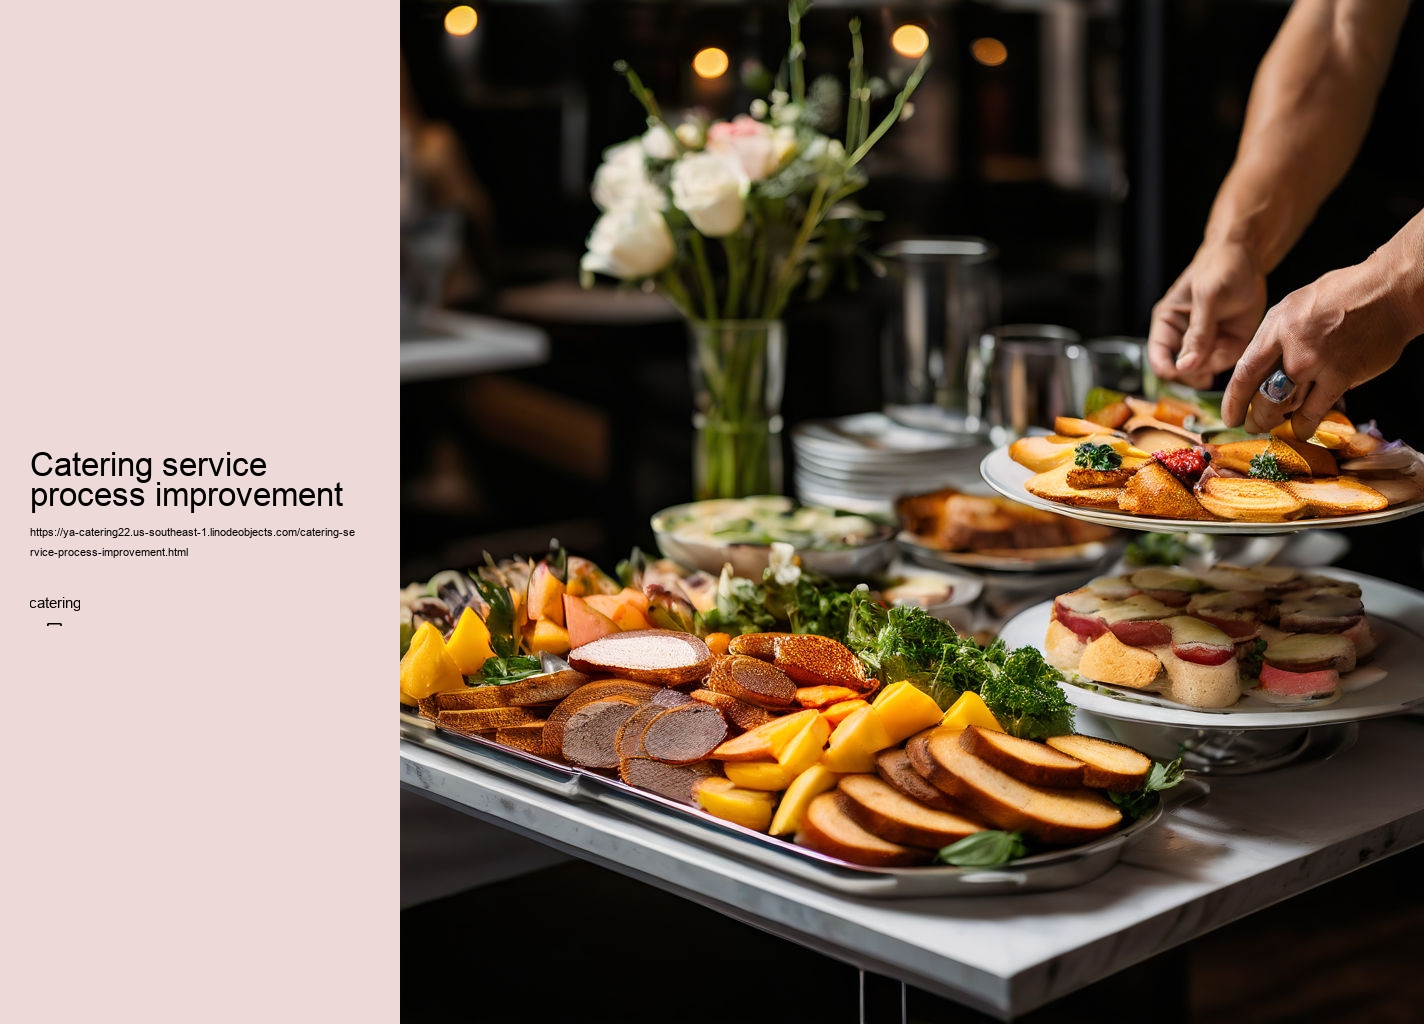 Catering service process improvement